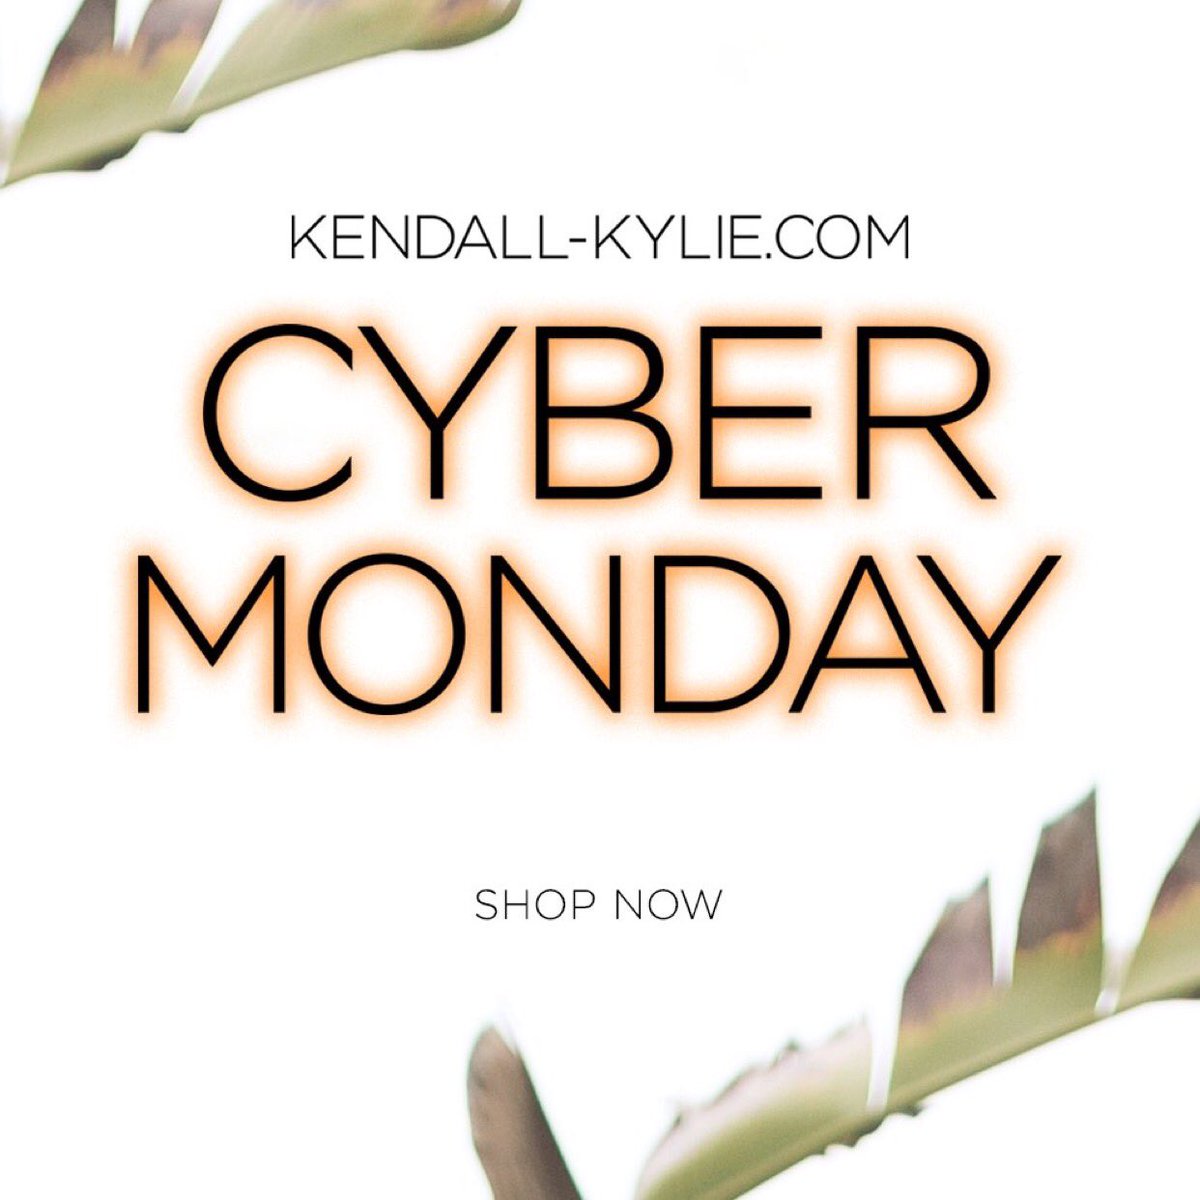 #CyberMonday sale on now at https://t.co/3cyzli5OR2 @KendallandKylie https://t.co/q26cR19K18